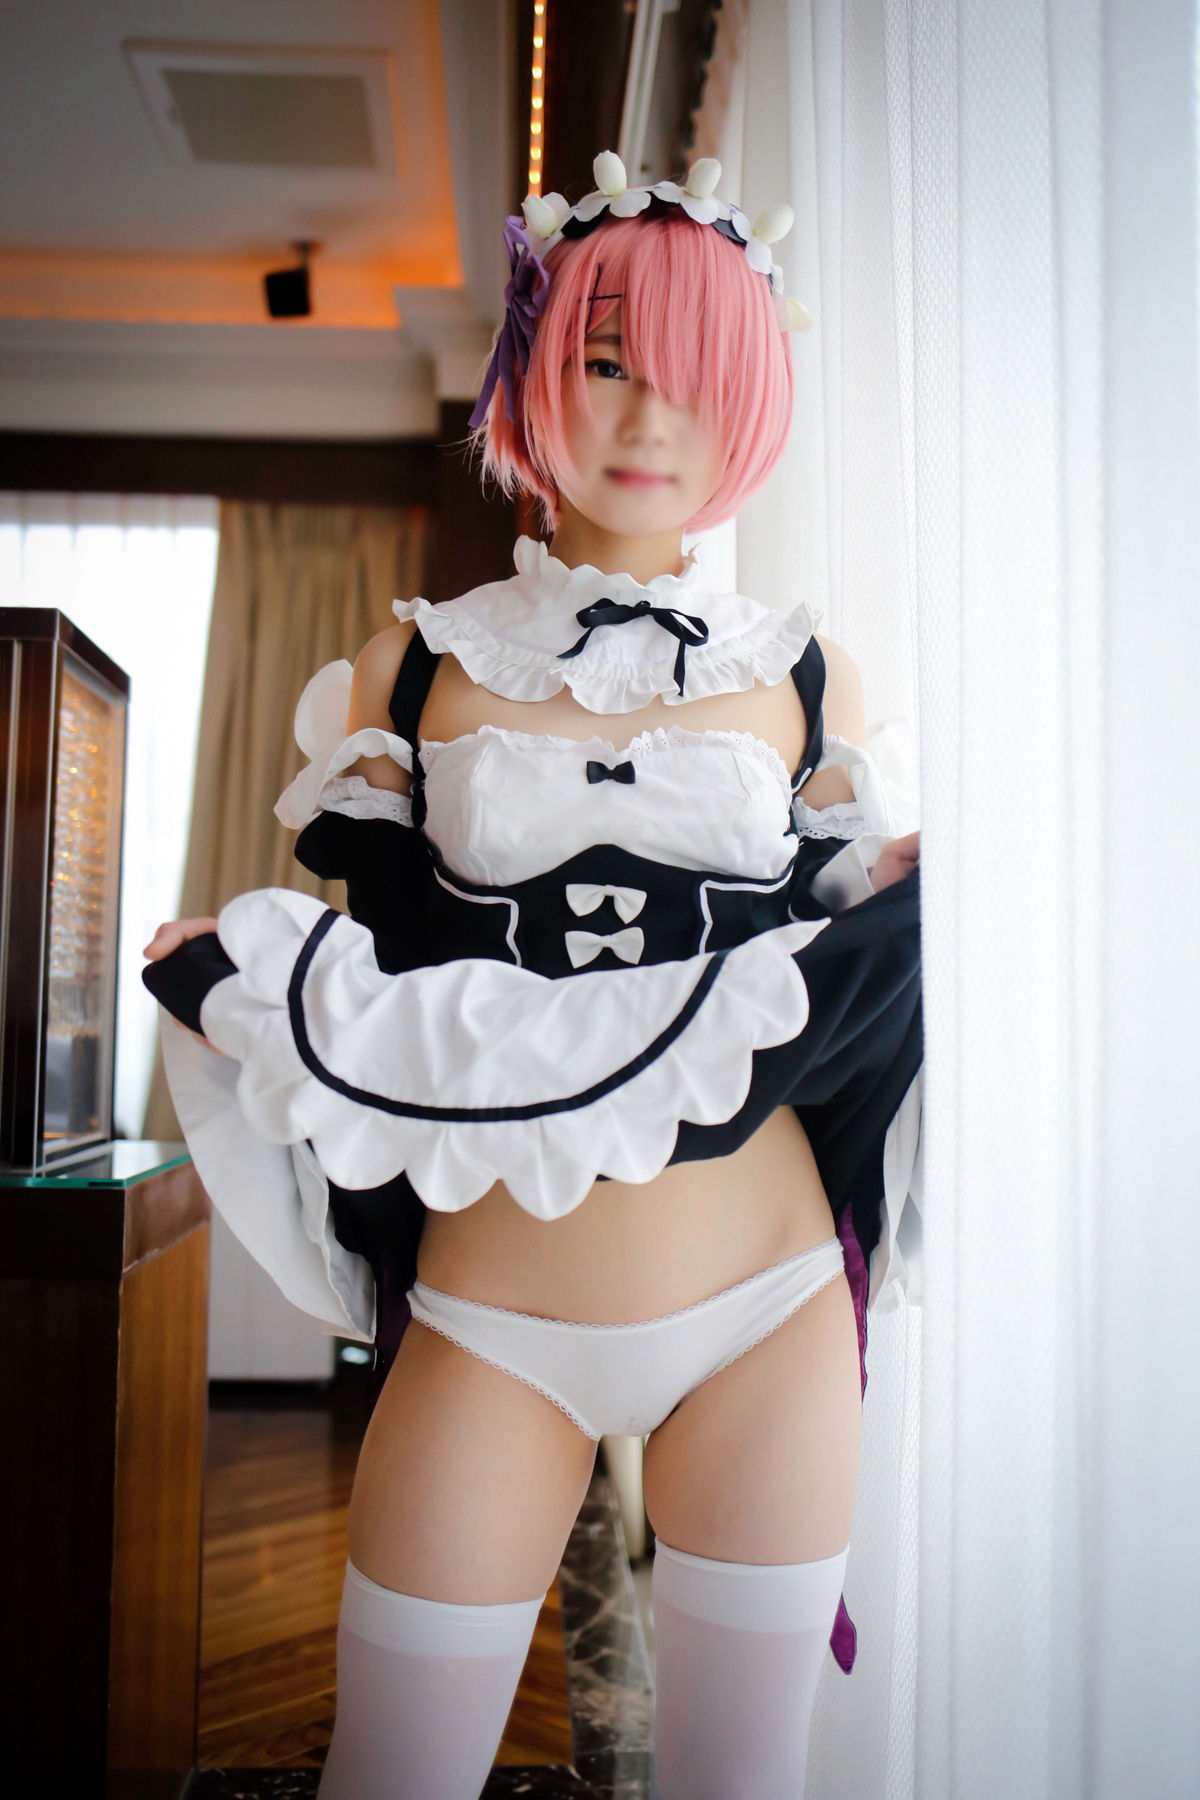 Naughty non REM ero Cosplay twin sister(1)